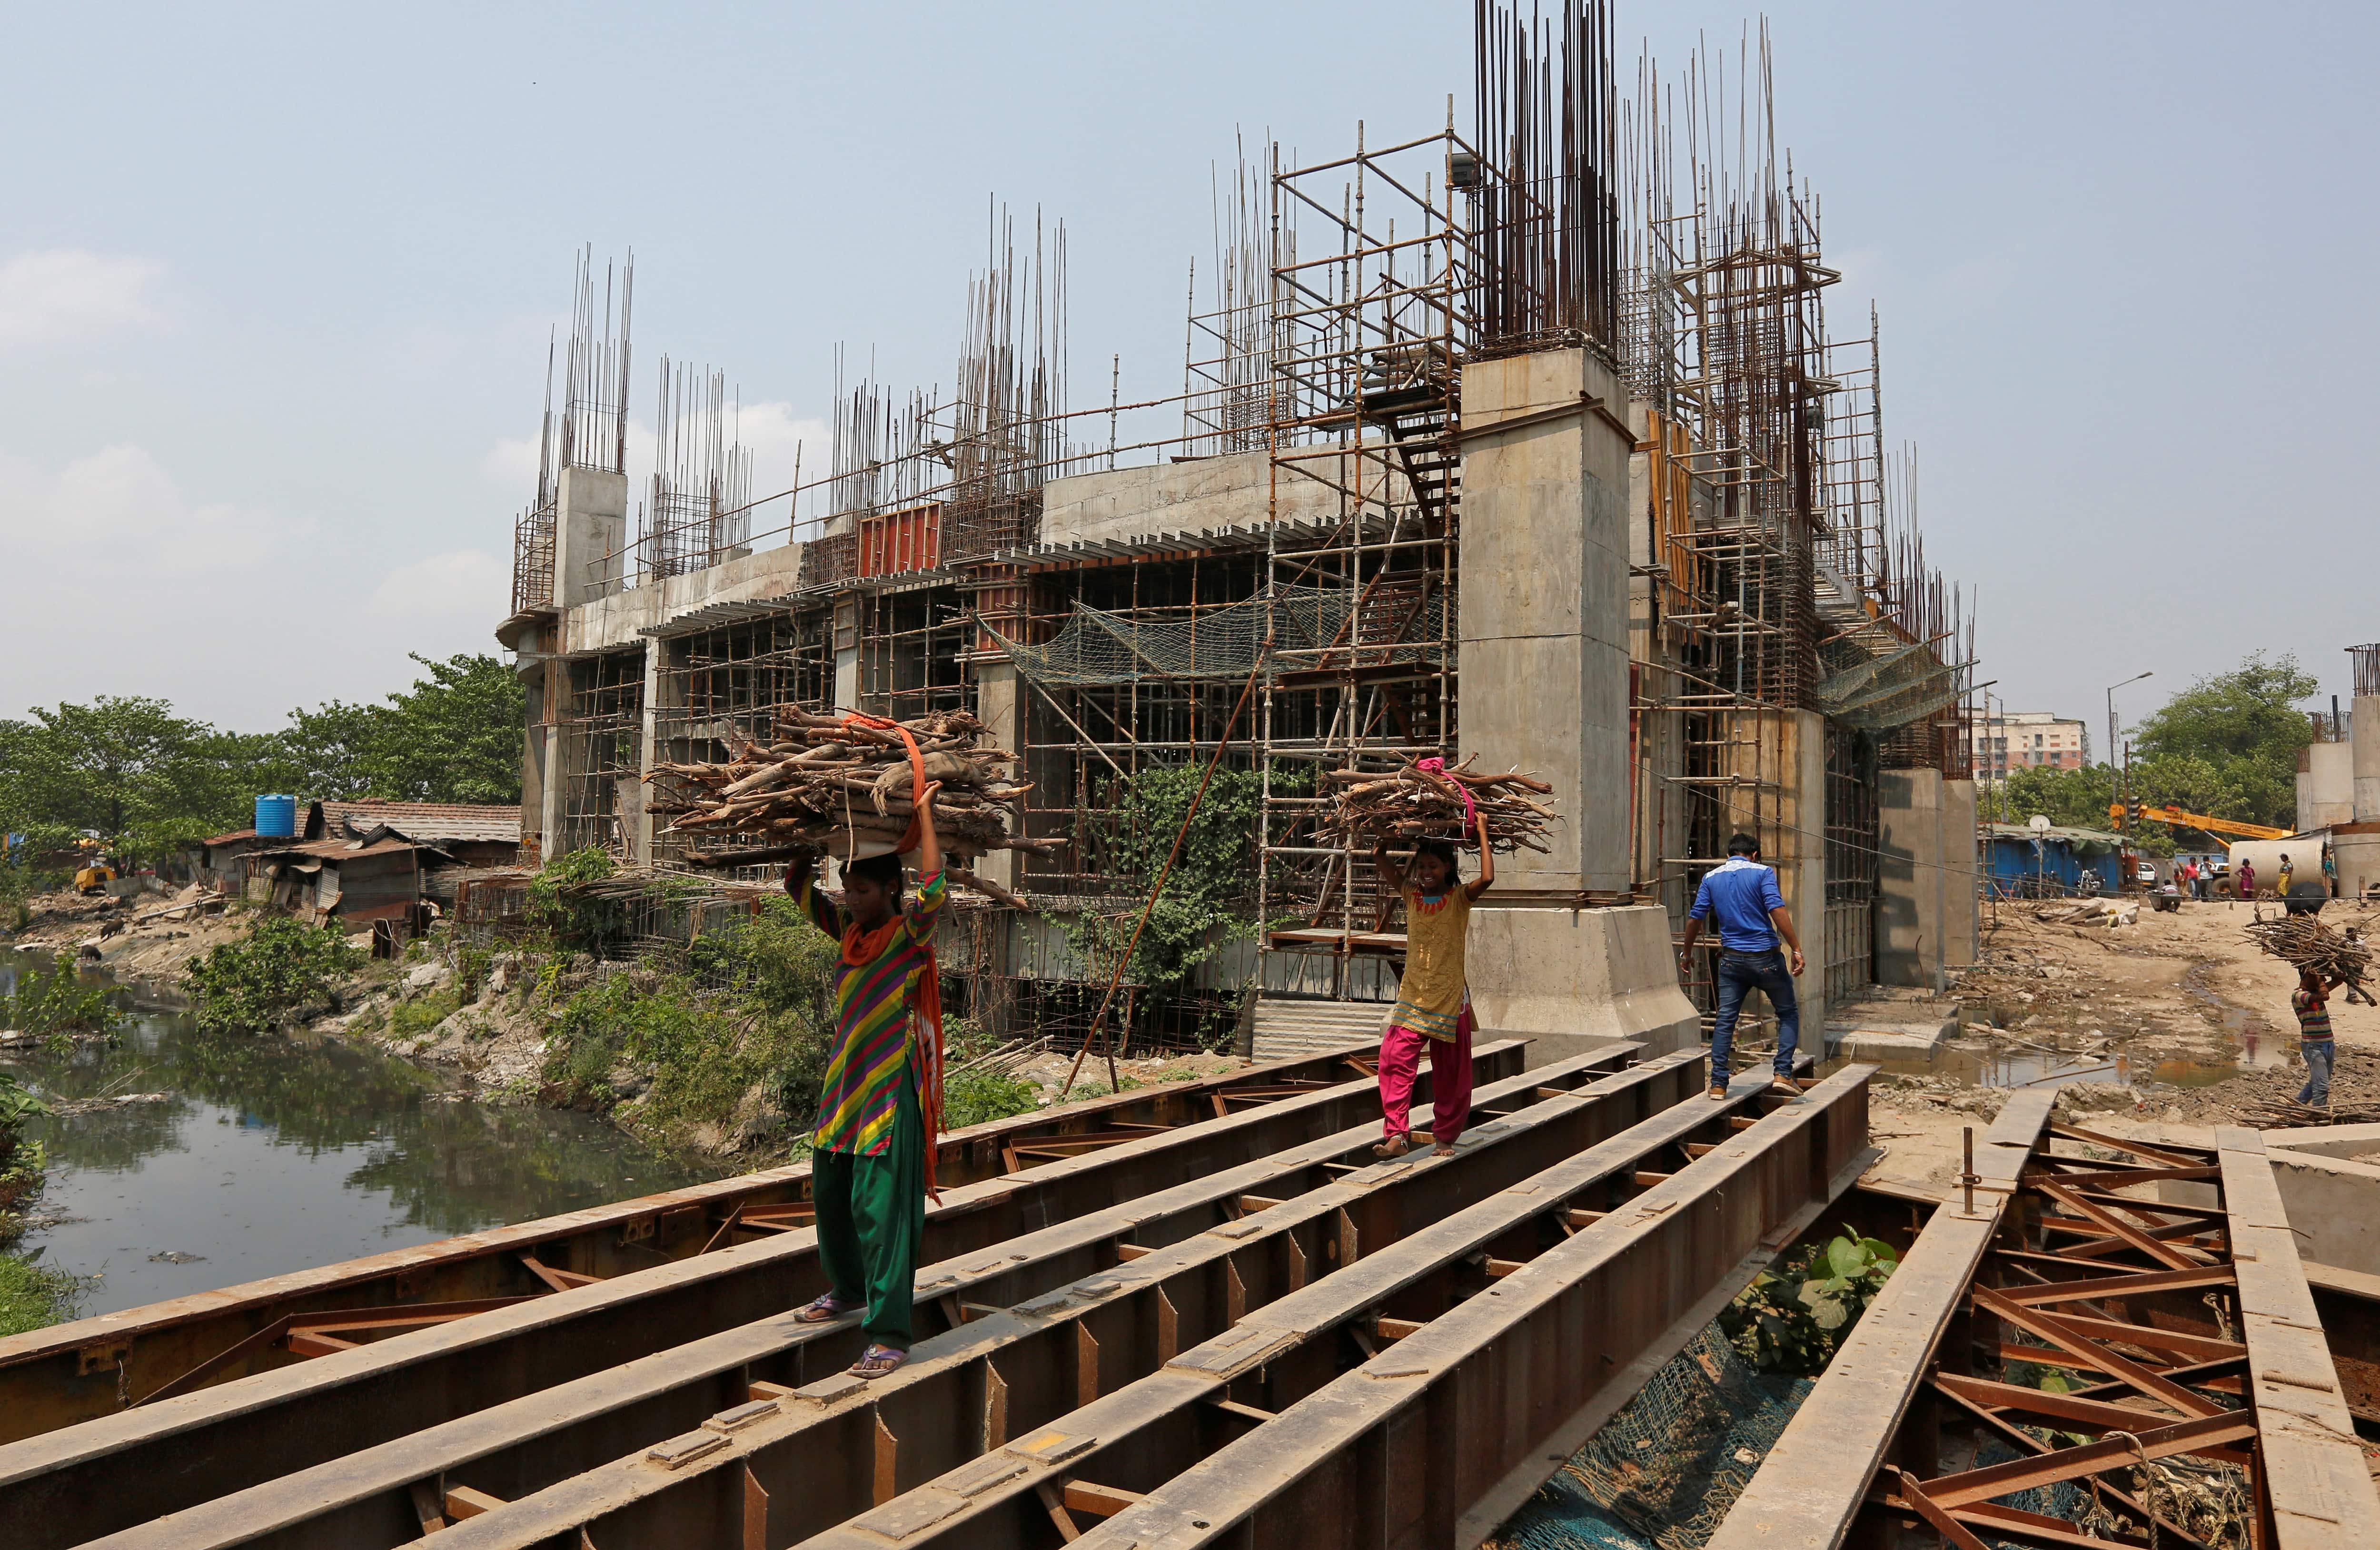 Govt says 448 infra projects hit by cost overrun of Rs 5.55 lakh crore in October-December